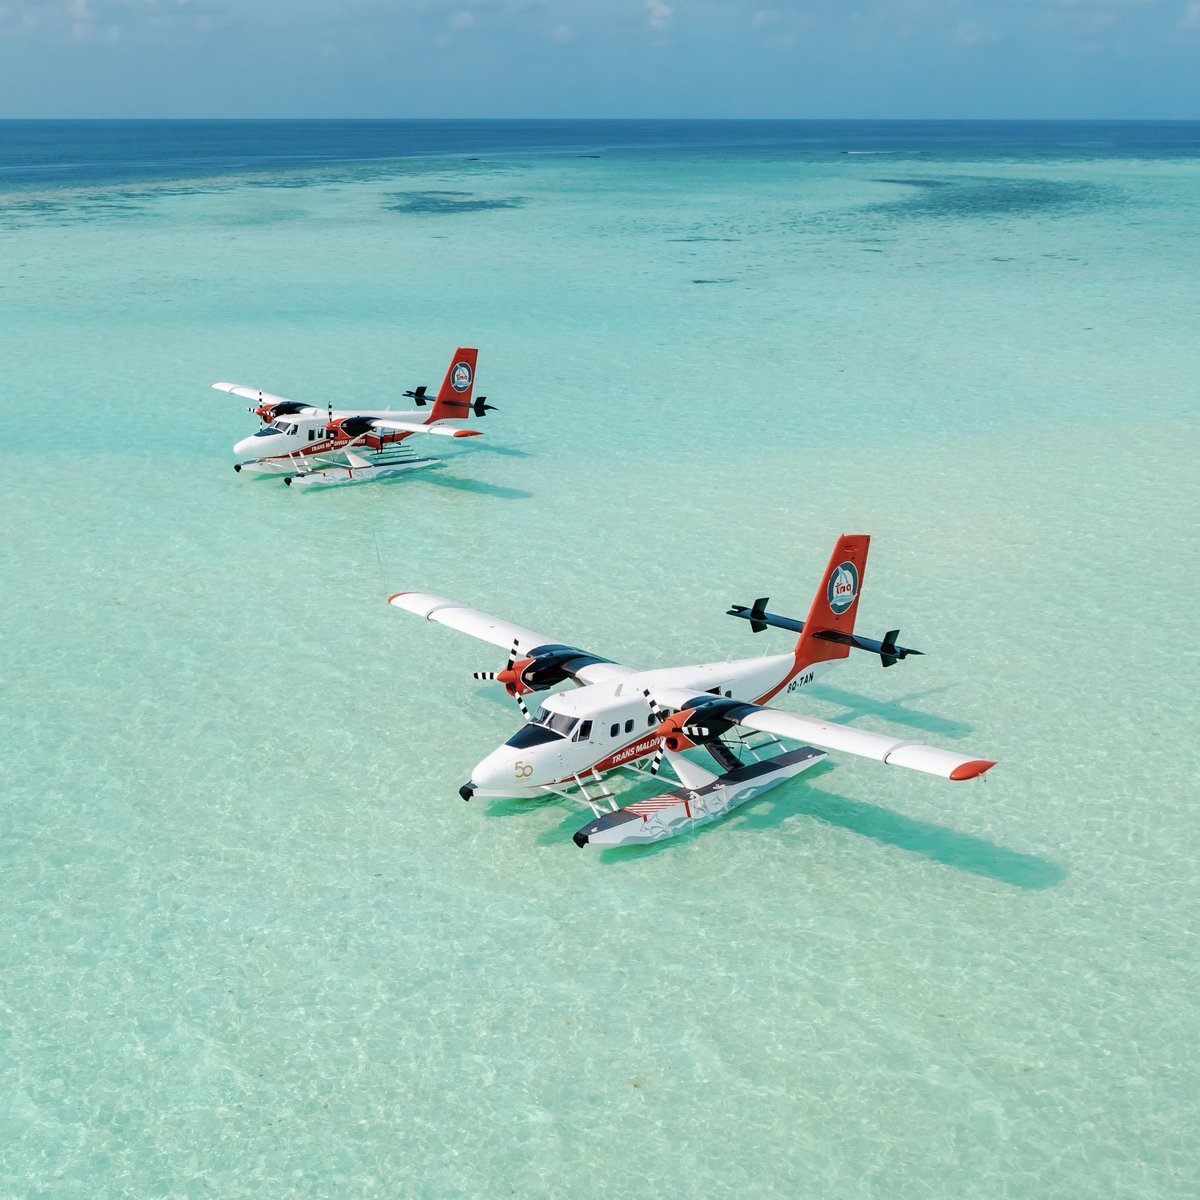 The red accents of our seaplanes perfectly compliment the gorgeous Maldivian blues 💙🗺️ 

#TransMaldivianAirways #TMA #TMAexperience #TwinOtter #Seaplane #Maldives #VisitMaldives #IndianOcean #BucketListDestinations #Travel #TravelSafe #Aviation #Aviators #FloatPlan